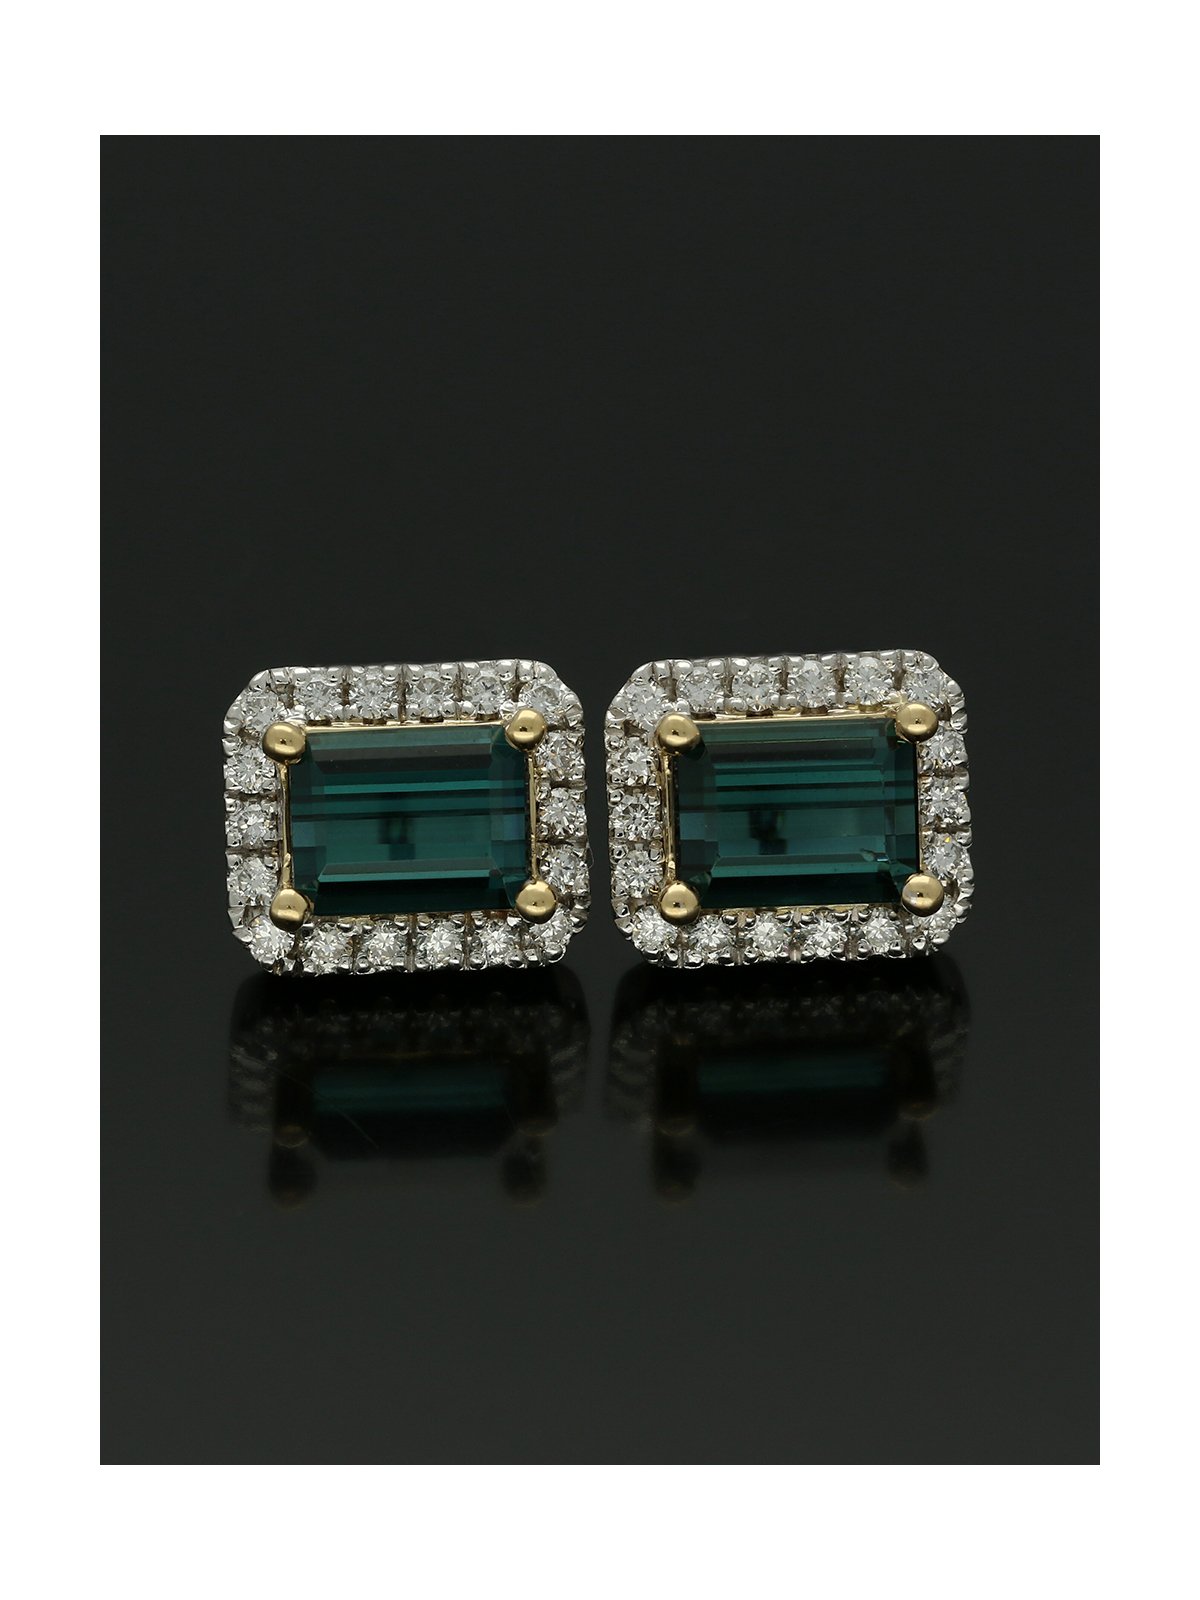 Tourmaline and Diamond Stud Earrings in 18ct Yellow and White Gold